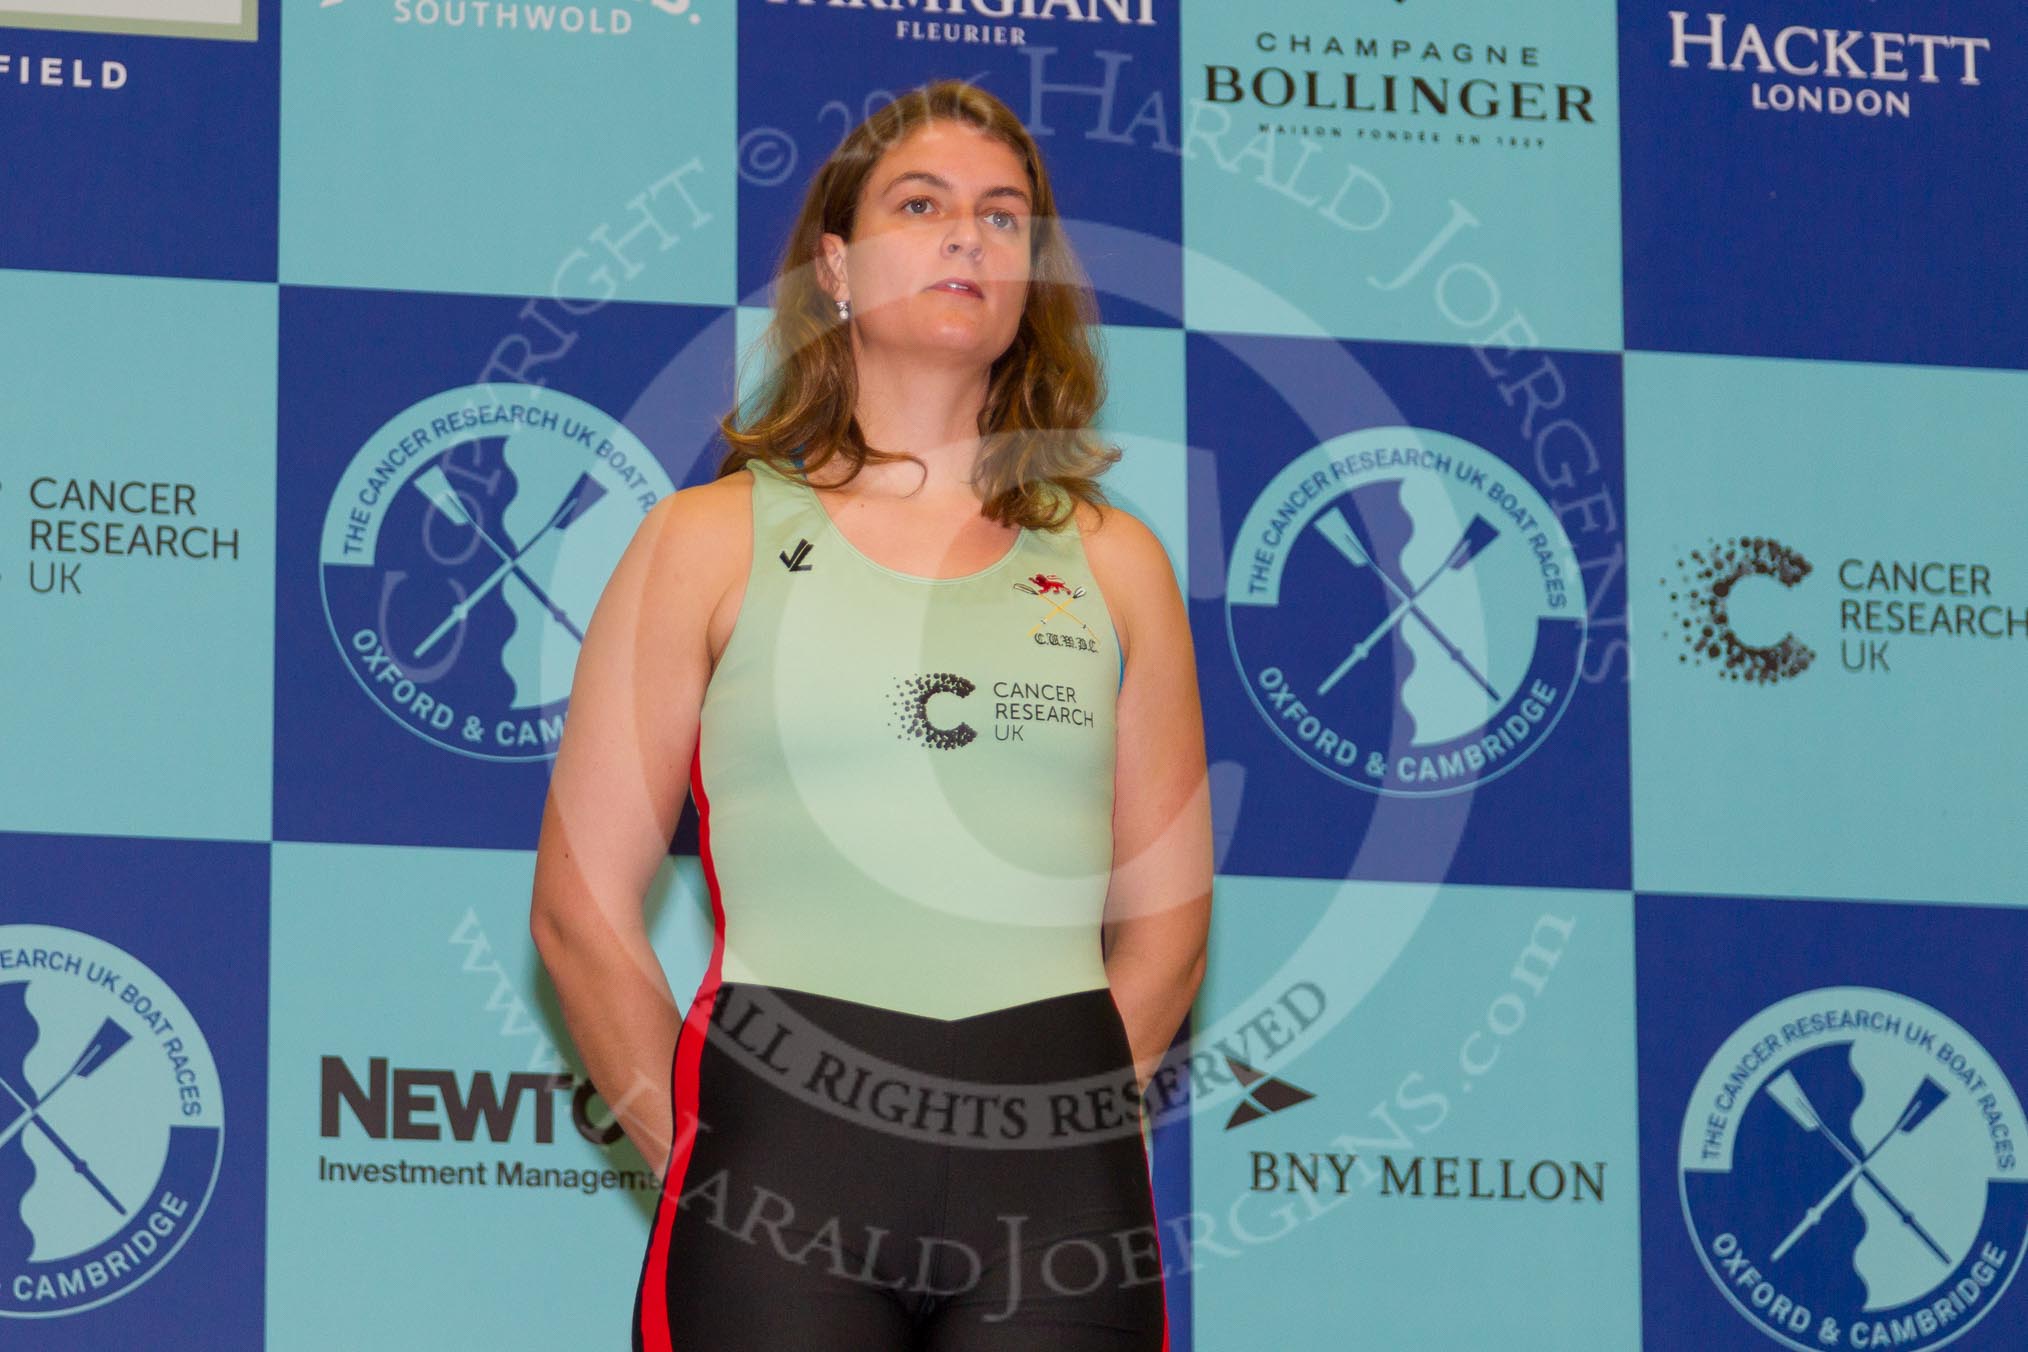 The Boat Race season 2016 - Crew Announcement and Weigh-In: The Women's Boat Race, stroke: Cambridge: Myriam Goudet – 80.4kg.
Westmister Hall, Westminster,
London SW11,

United Kingdom,
on 01 March 2016 at 10:14, image #45